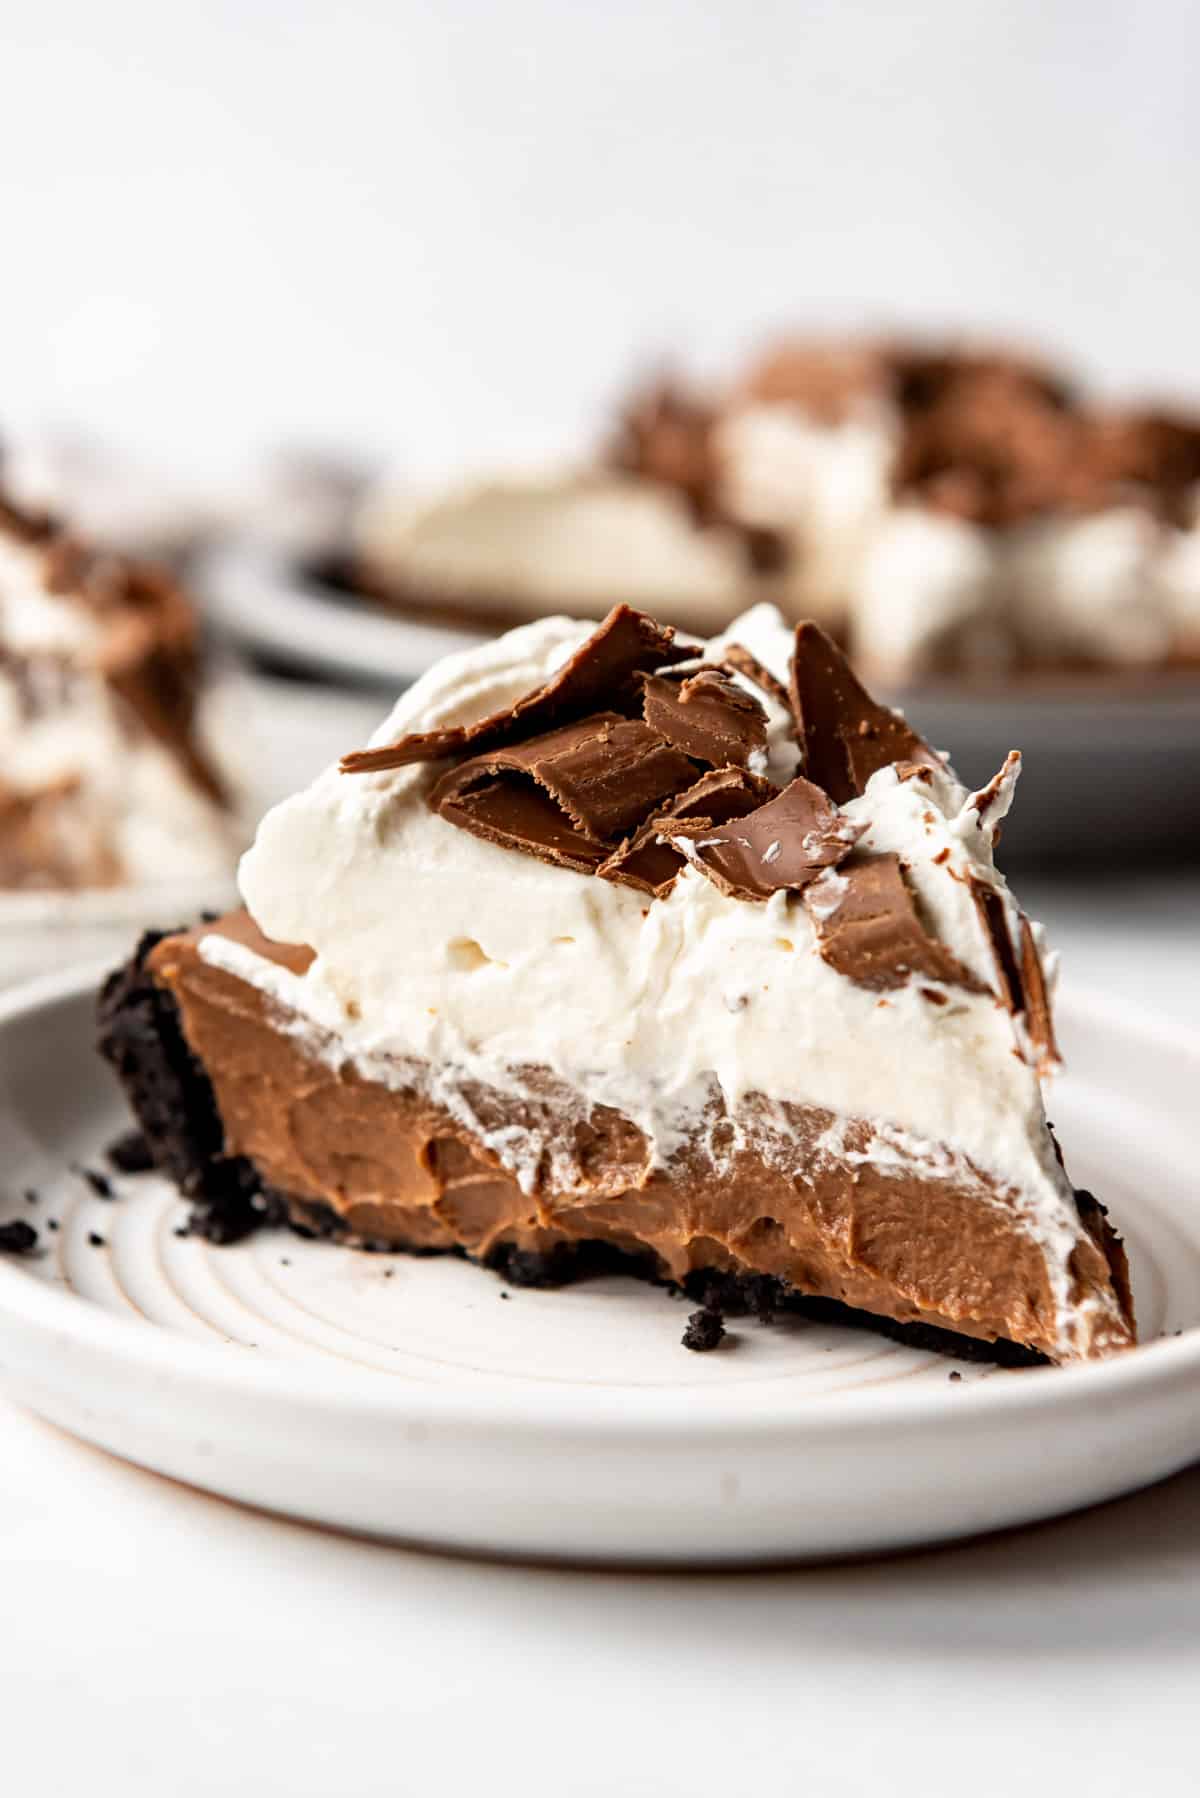 A slice of chocolate cream pie topped with whipped cream and chocolate curls on a white plate.